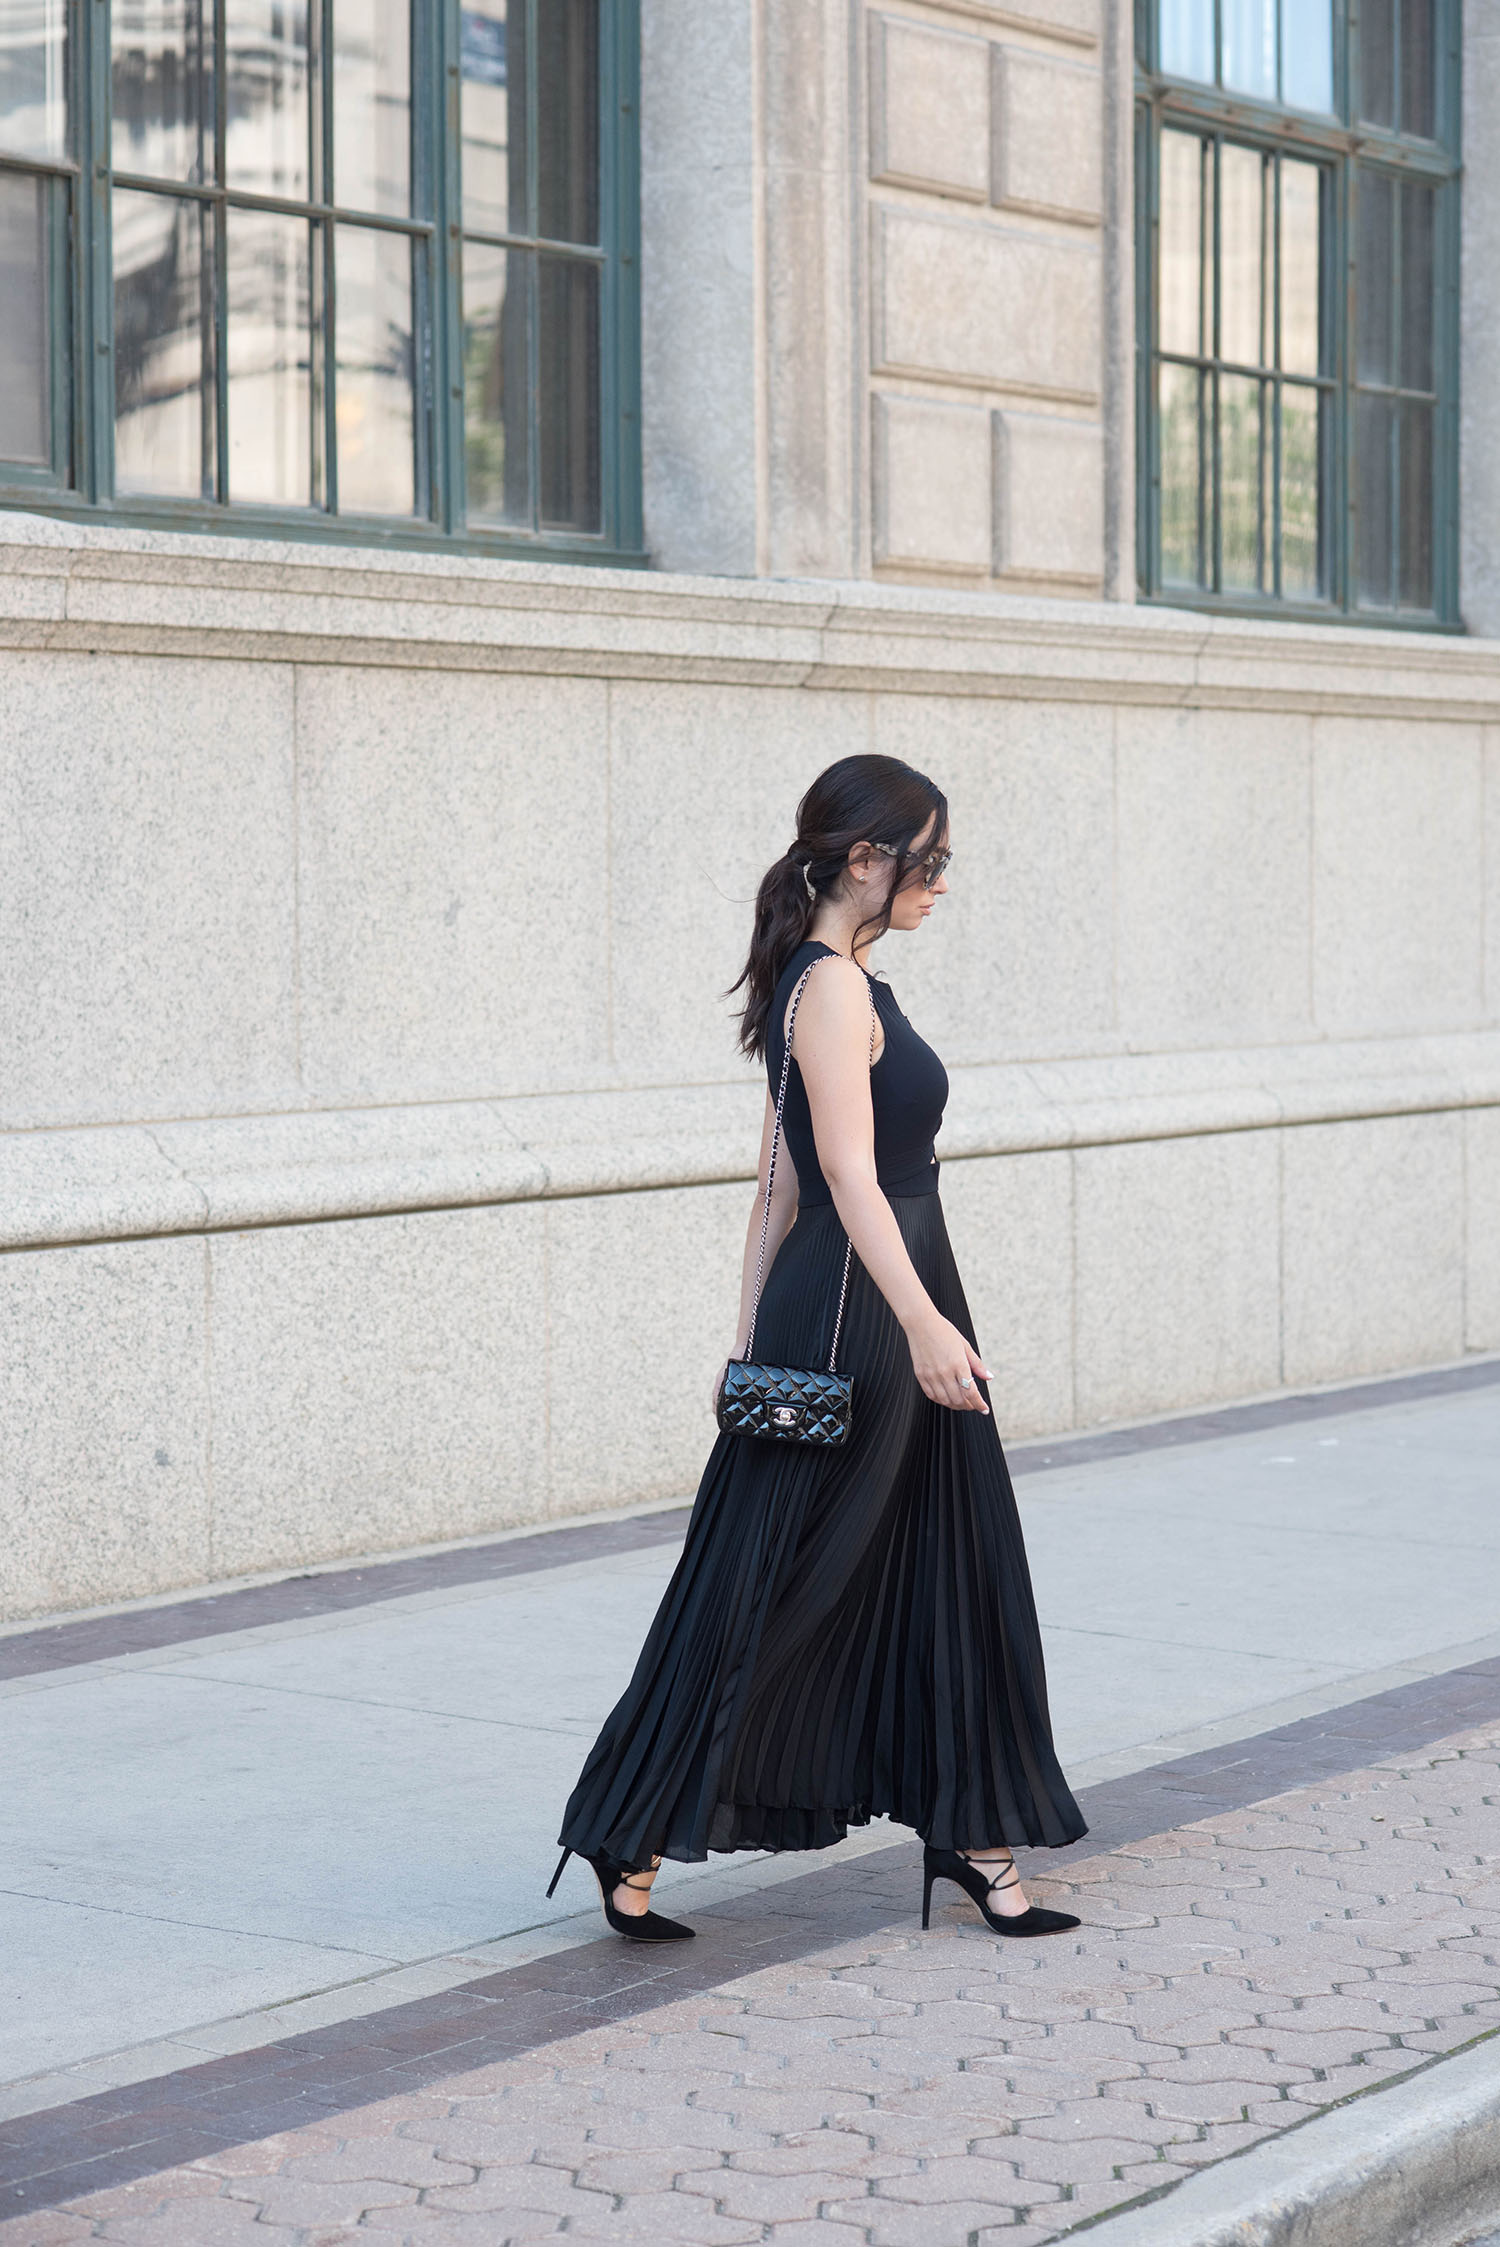 Winnipeg fashion blogger Cee Fardoe of Coco & Vera walks in the Exchange District wearing a black ALC gown and carrying a Chanel extra mini handbag